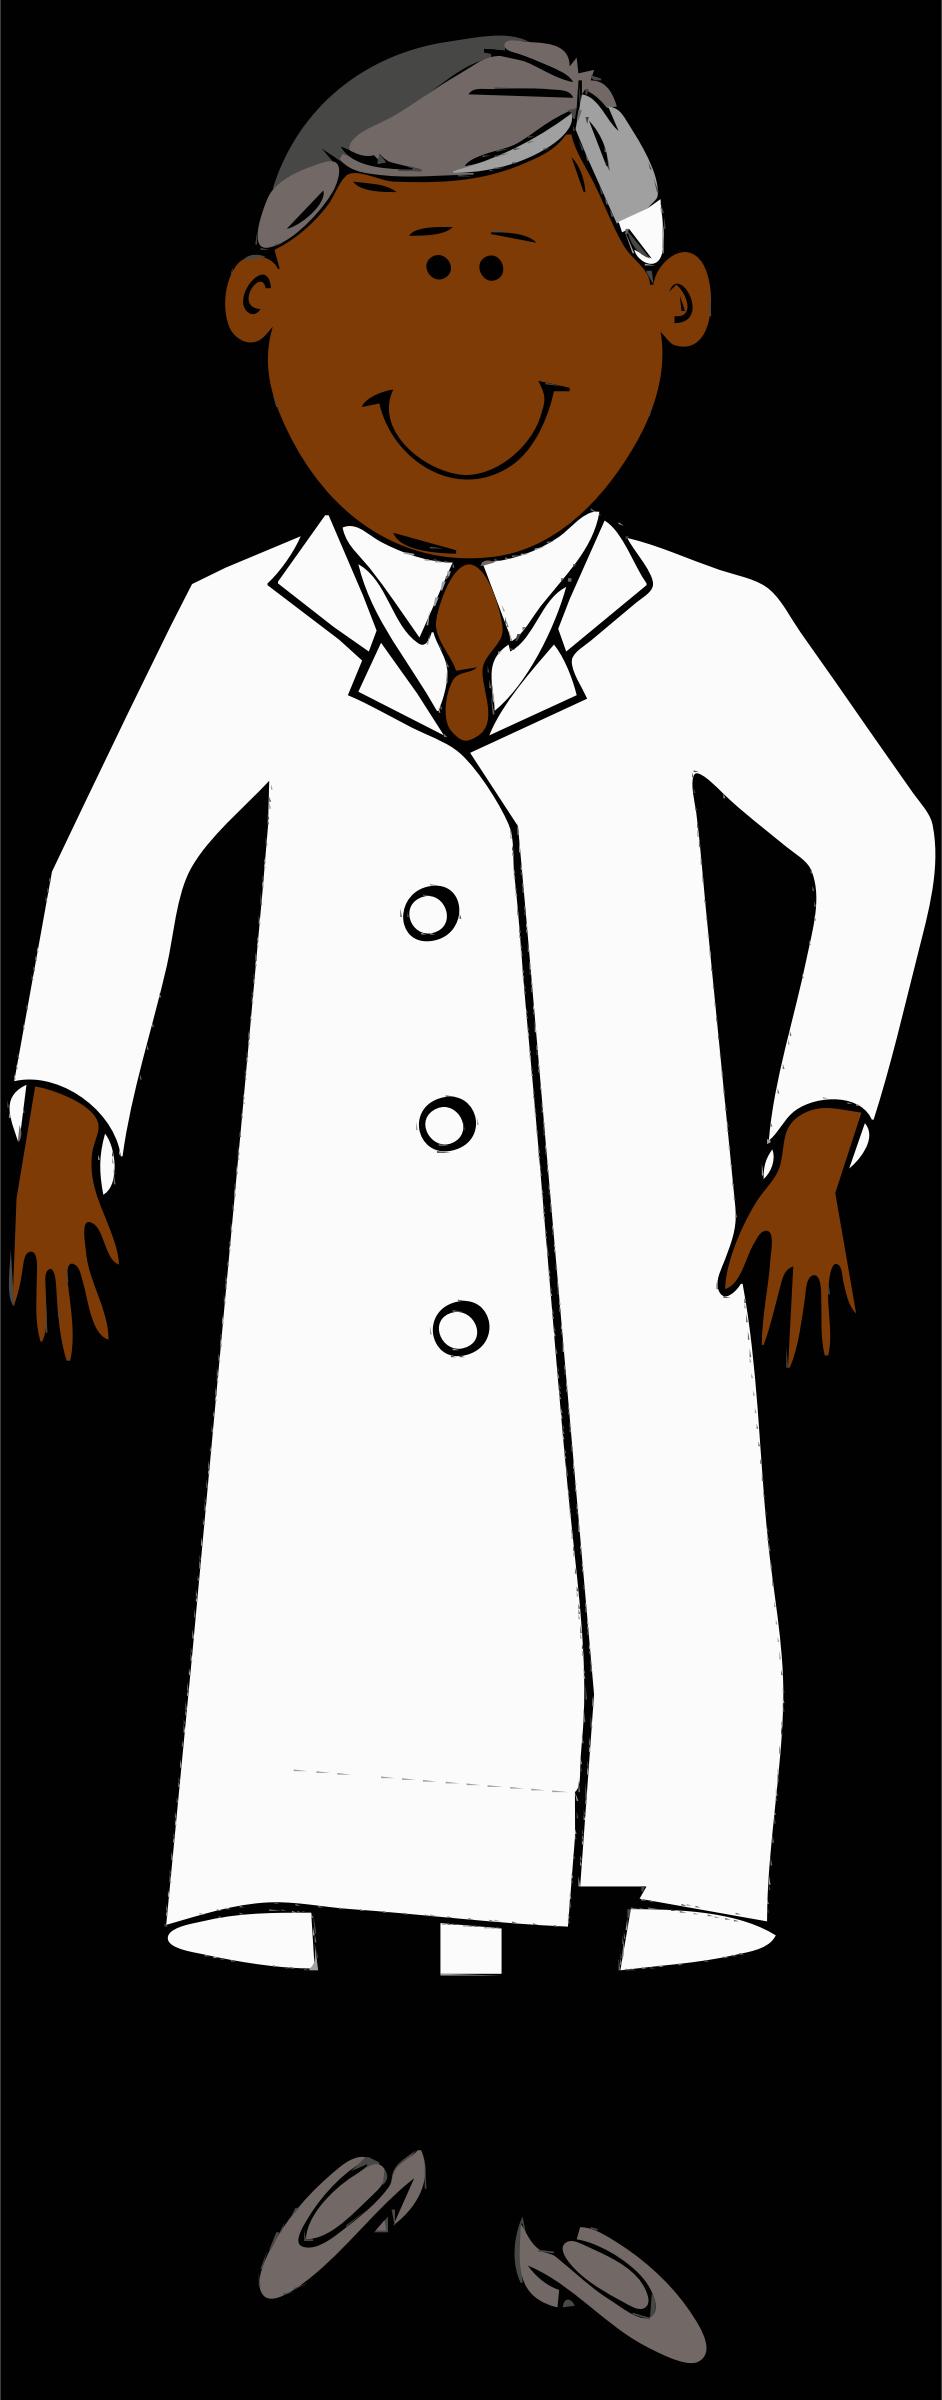 lab coat worn by scientist with grey hair png